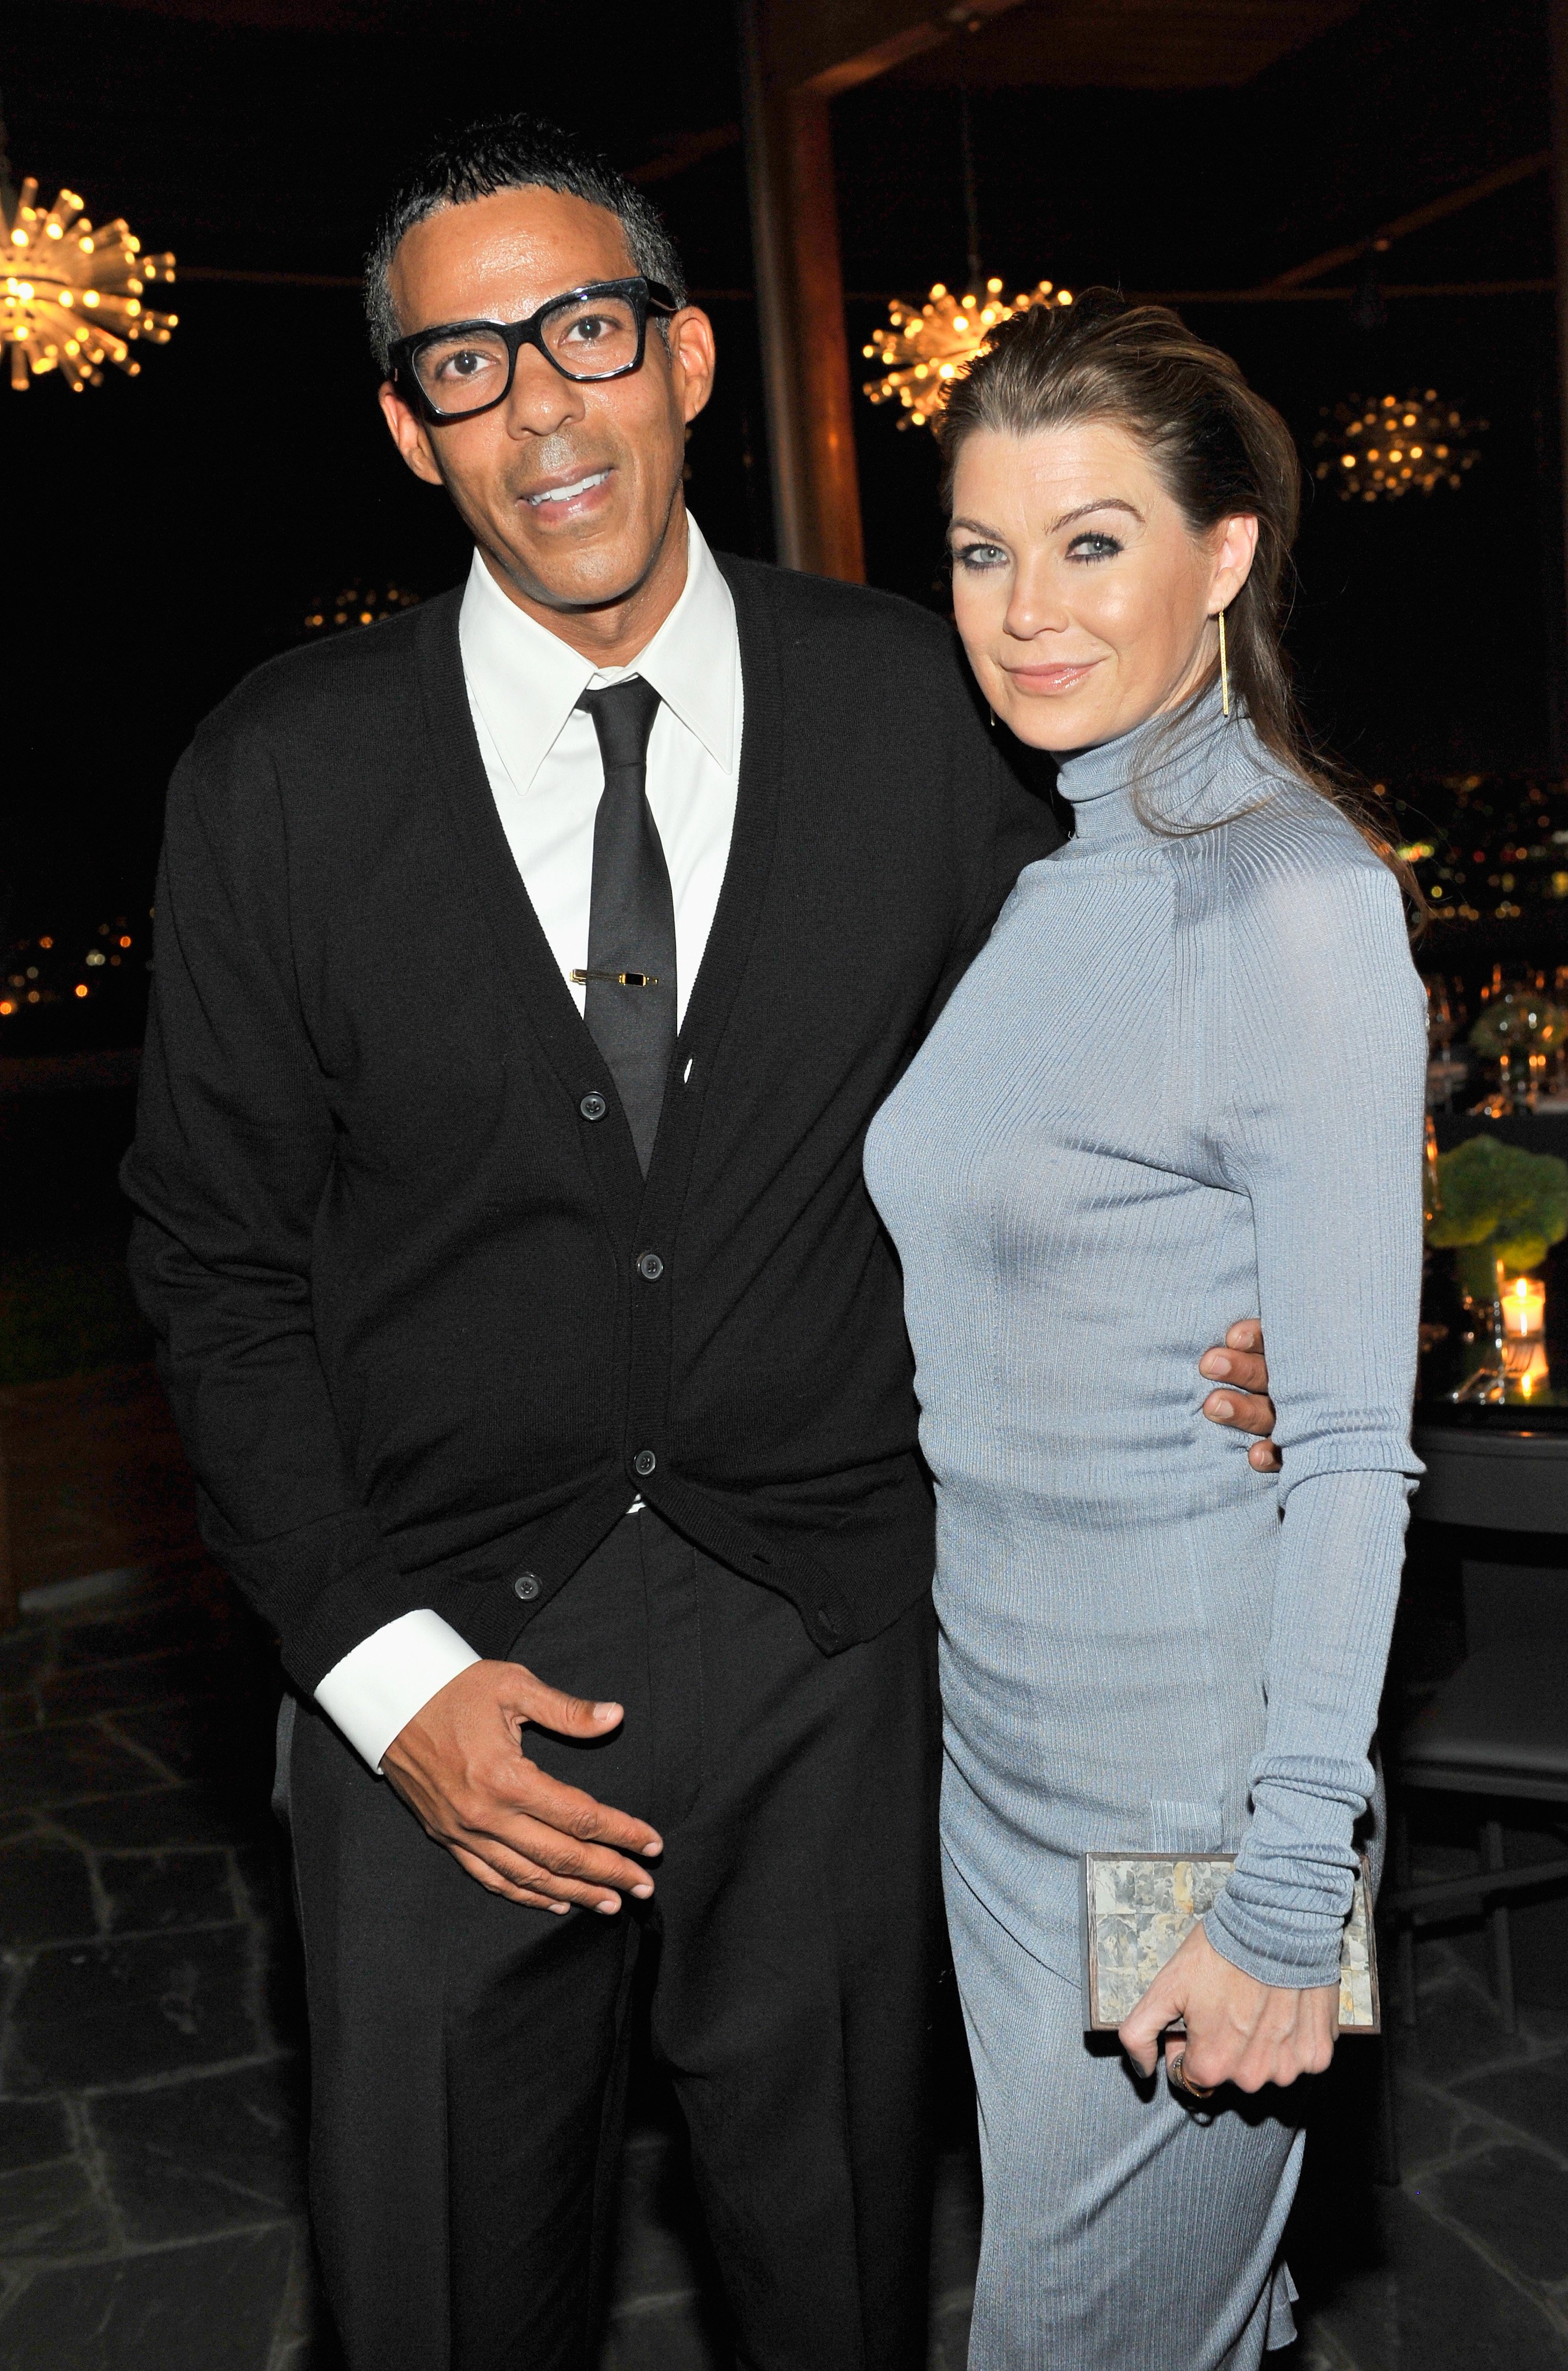 Actress Ellen Pompeo and Chris Ivery attend a private dinner hosted by VOGUE on November 5, 2014. | Source: Donato Sardella/Getty Images